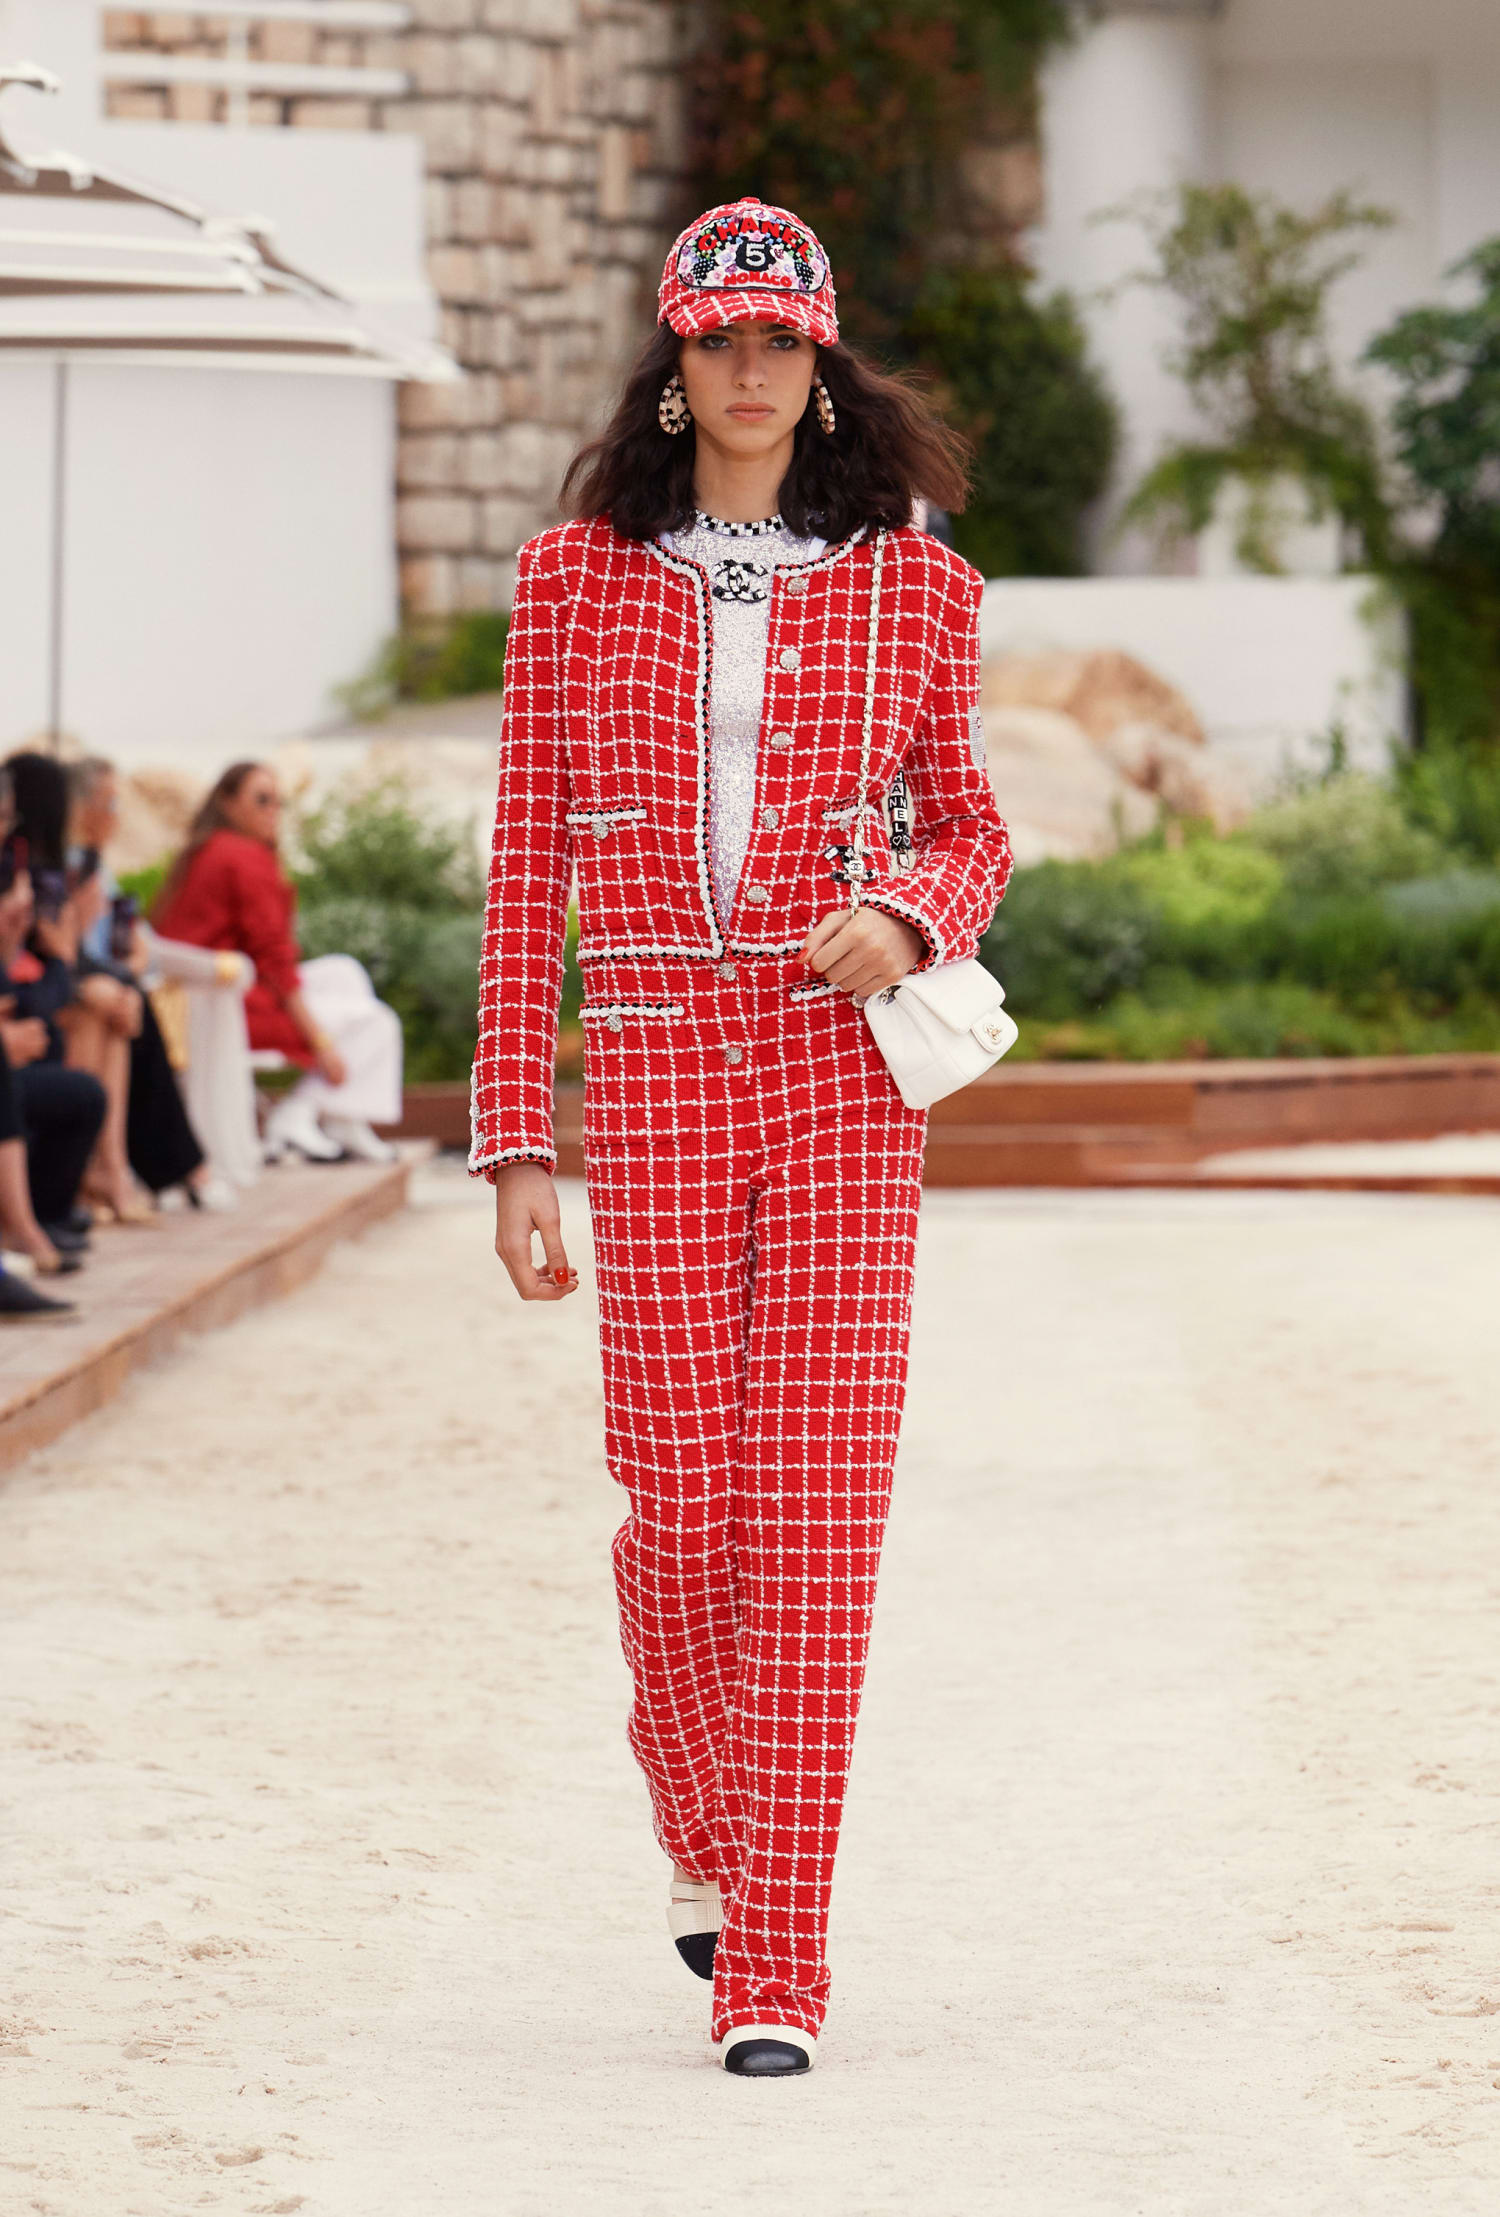 CHANEL CRUISE 2022/23 COLLECTION - Time International